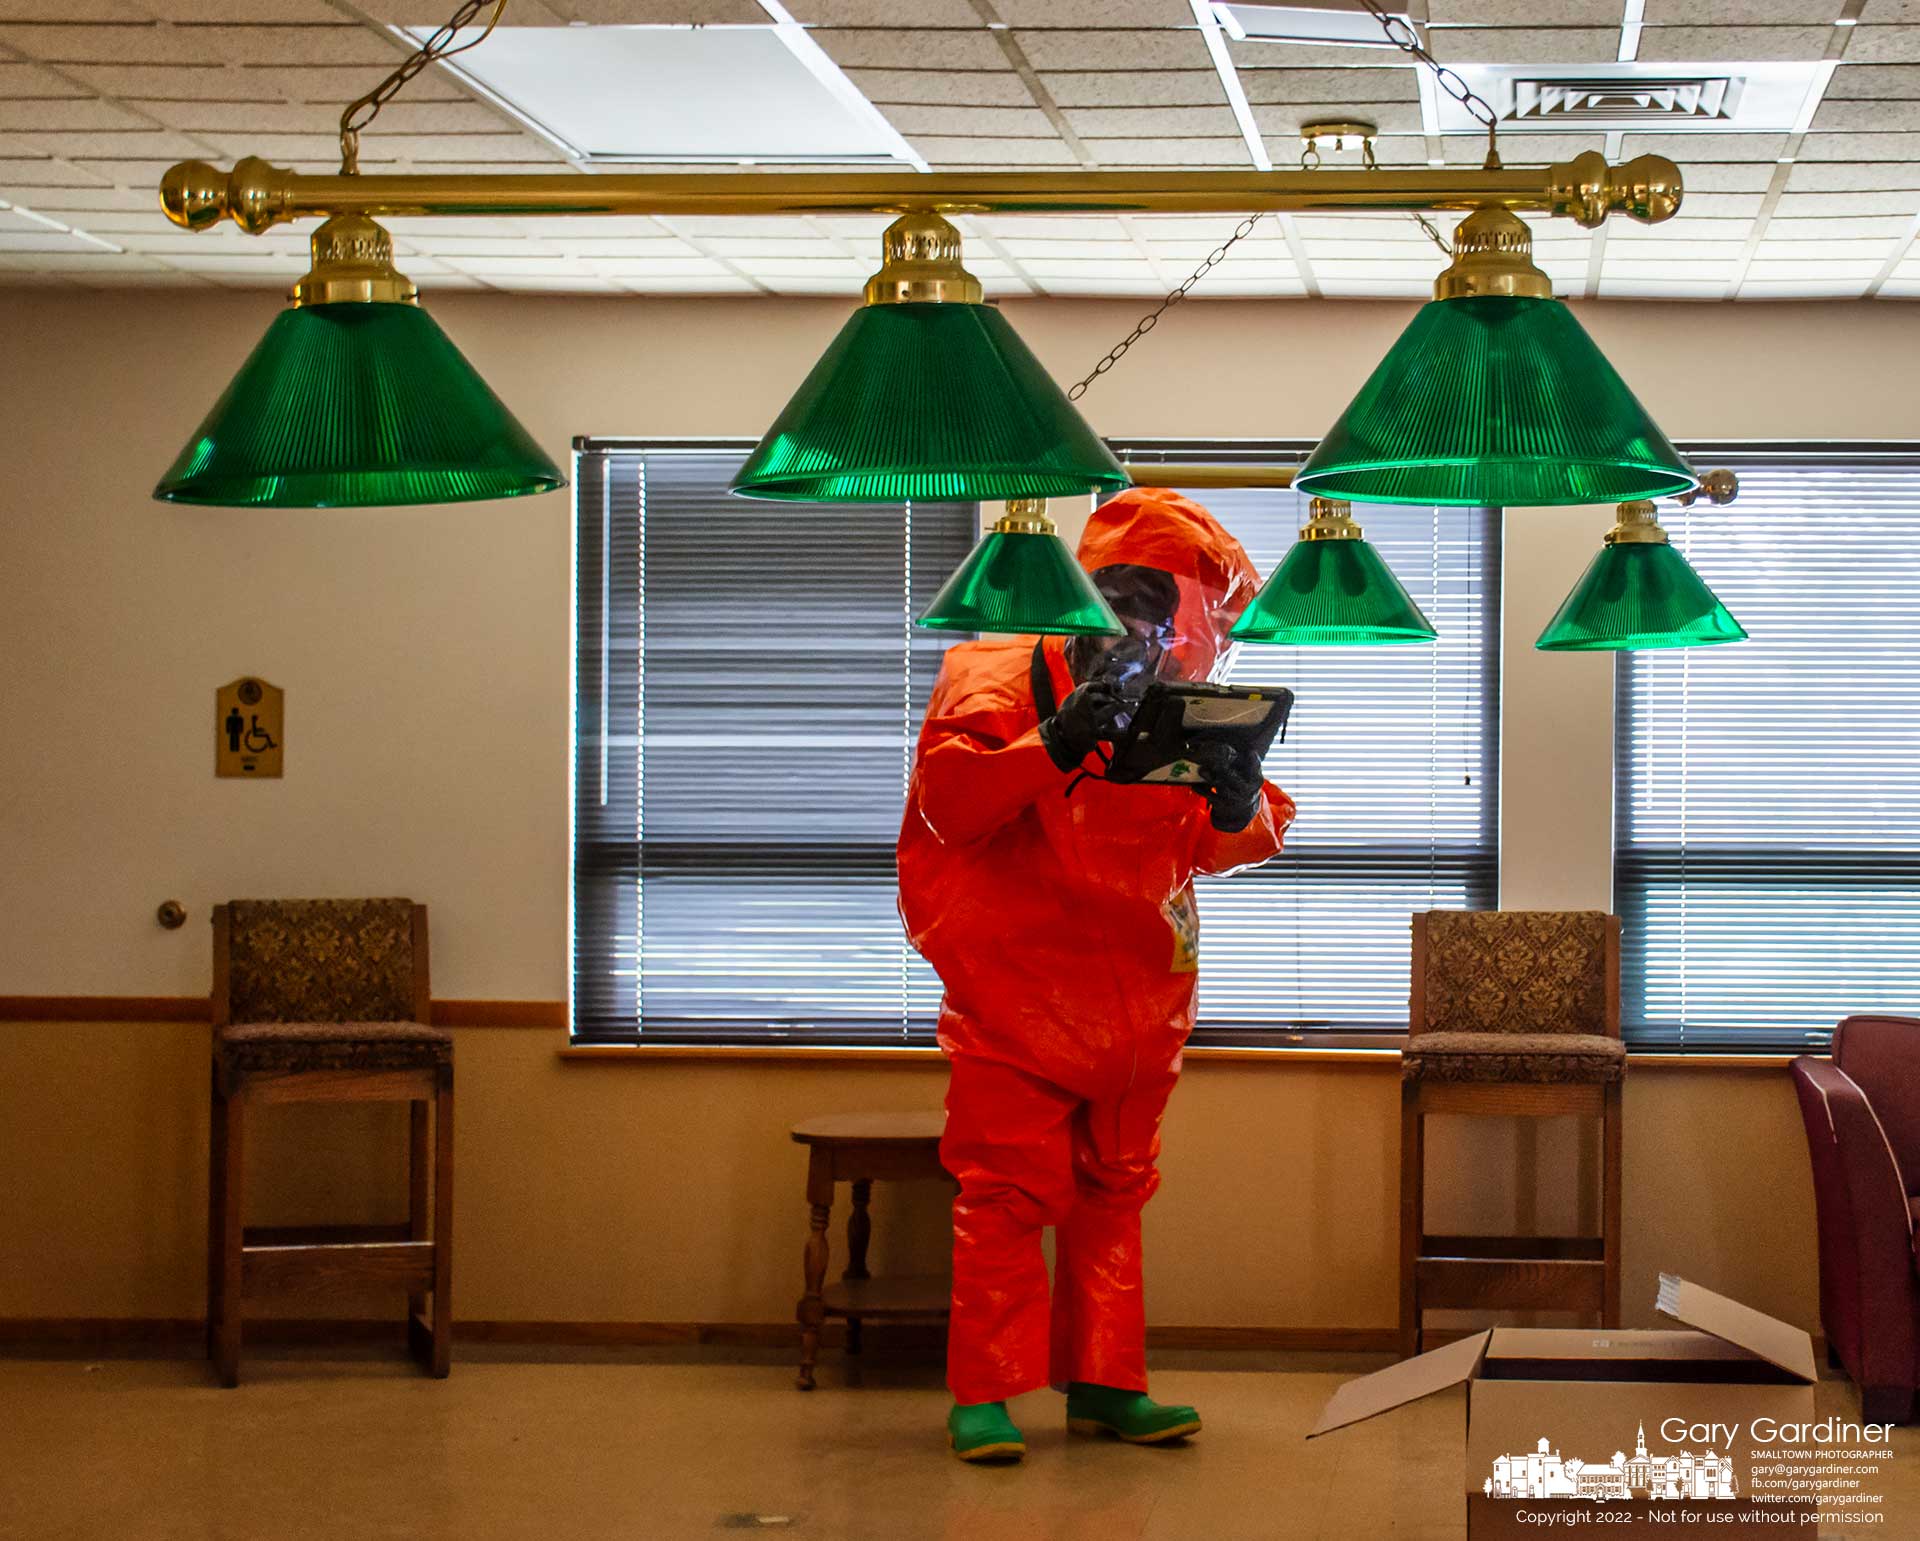 An Ohio National Guard soldier wearing protective gear checks the readout on a portable monitor as he walks through the pool table room at the old Westerville Senior Center during a training session for the detection of weapons of mass destruction by the Guard's 52nd Civil Support Team. My Final Photo for April 7, 2022.